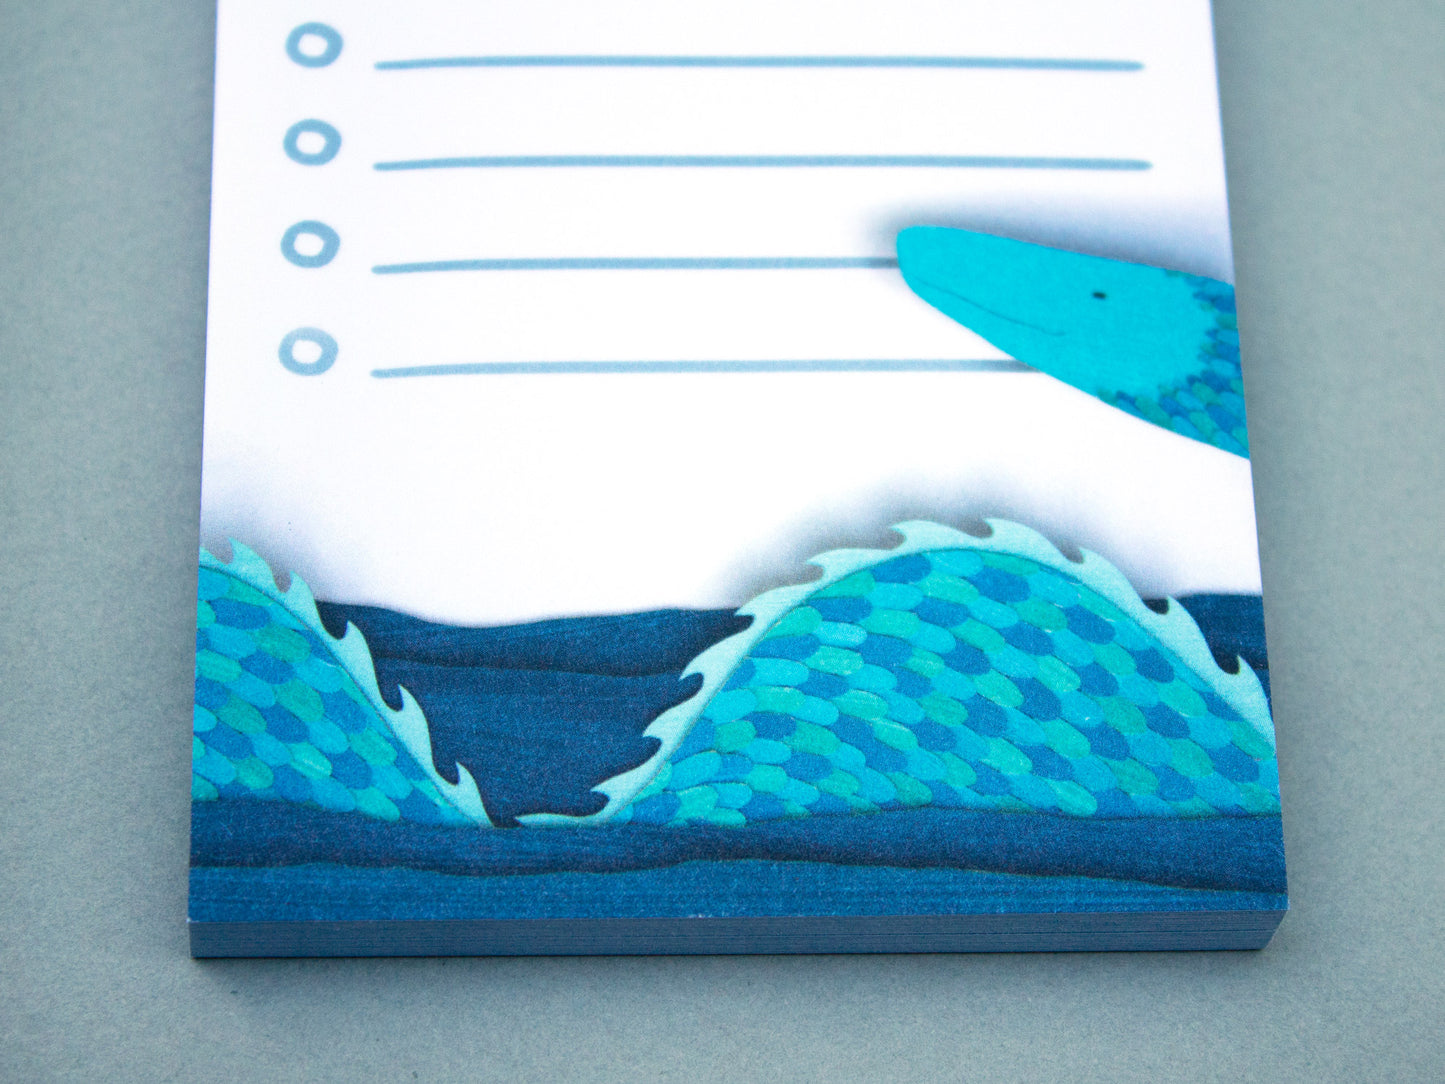 Cute notepad with cut paper illustration of blue sea serpent monster at bottom and sea gull at top.